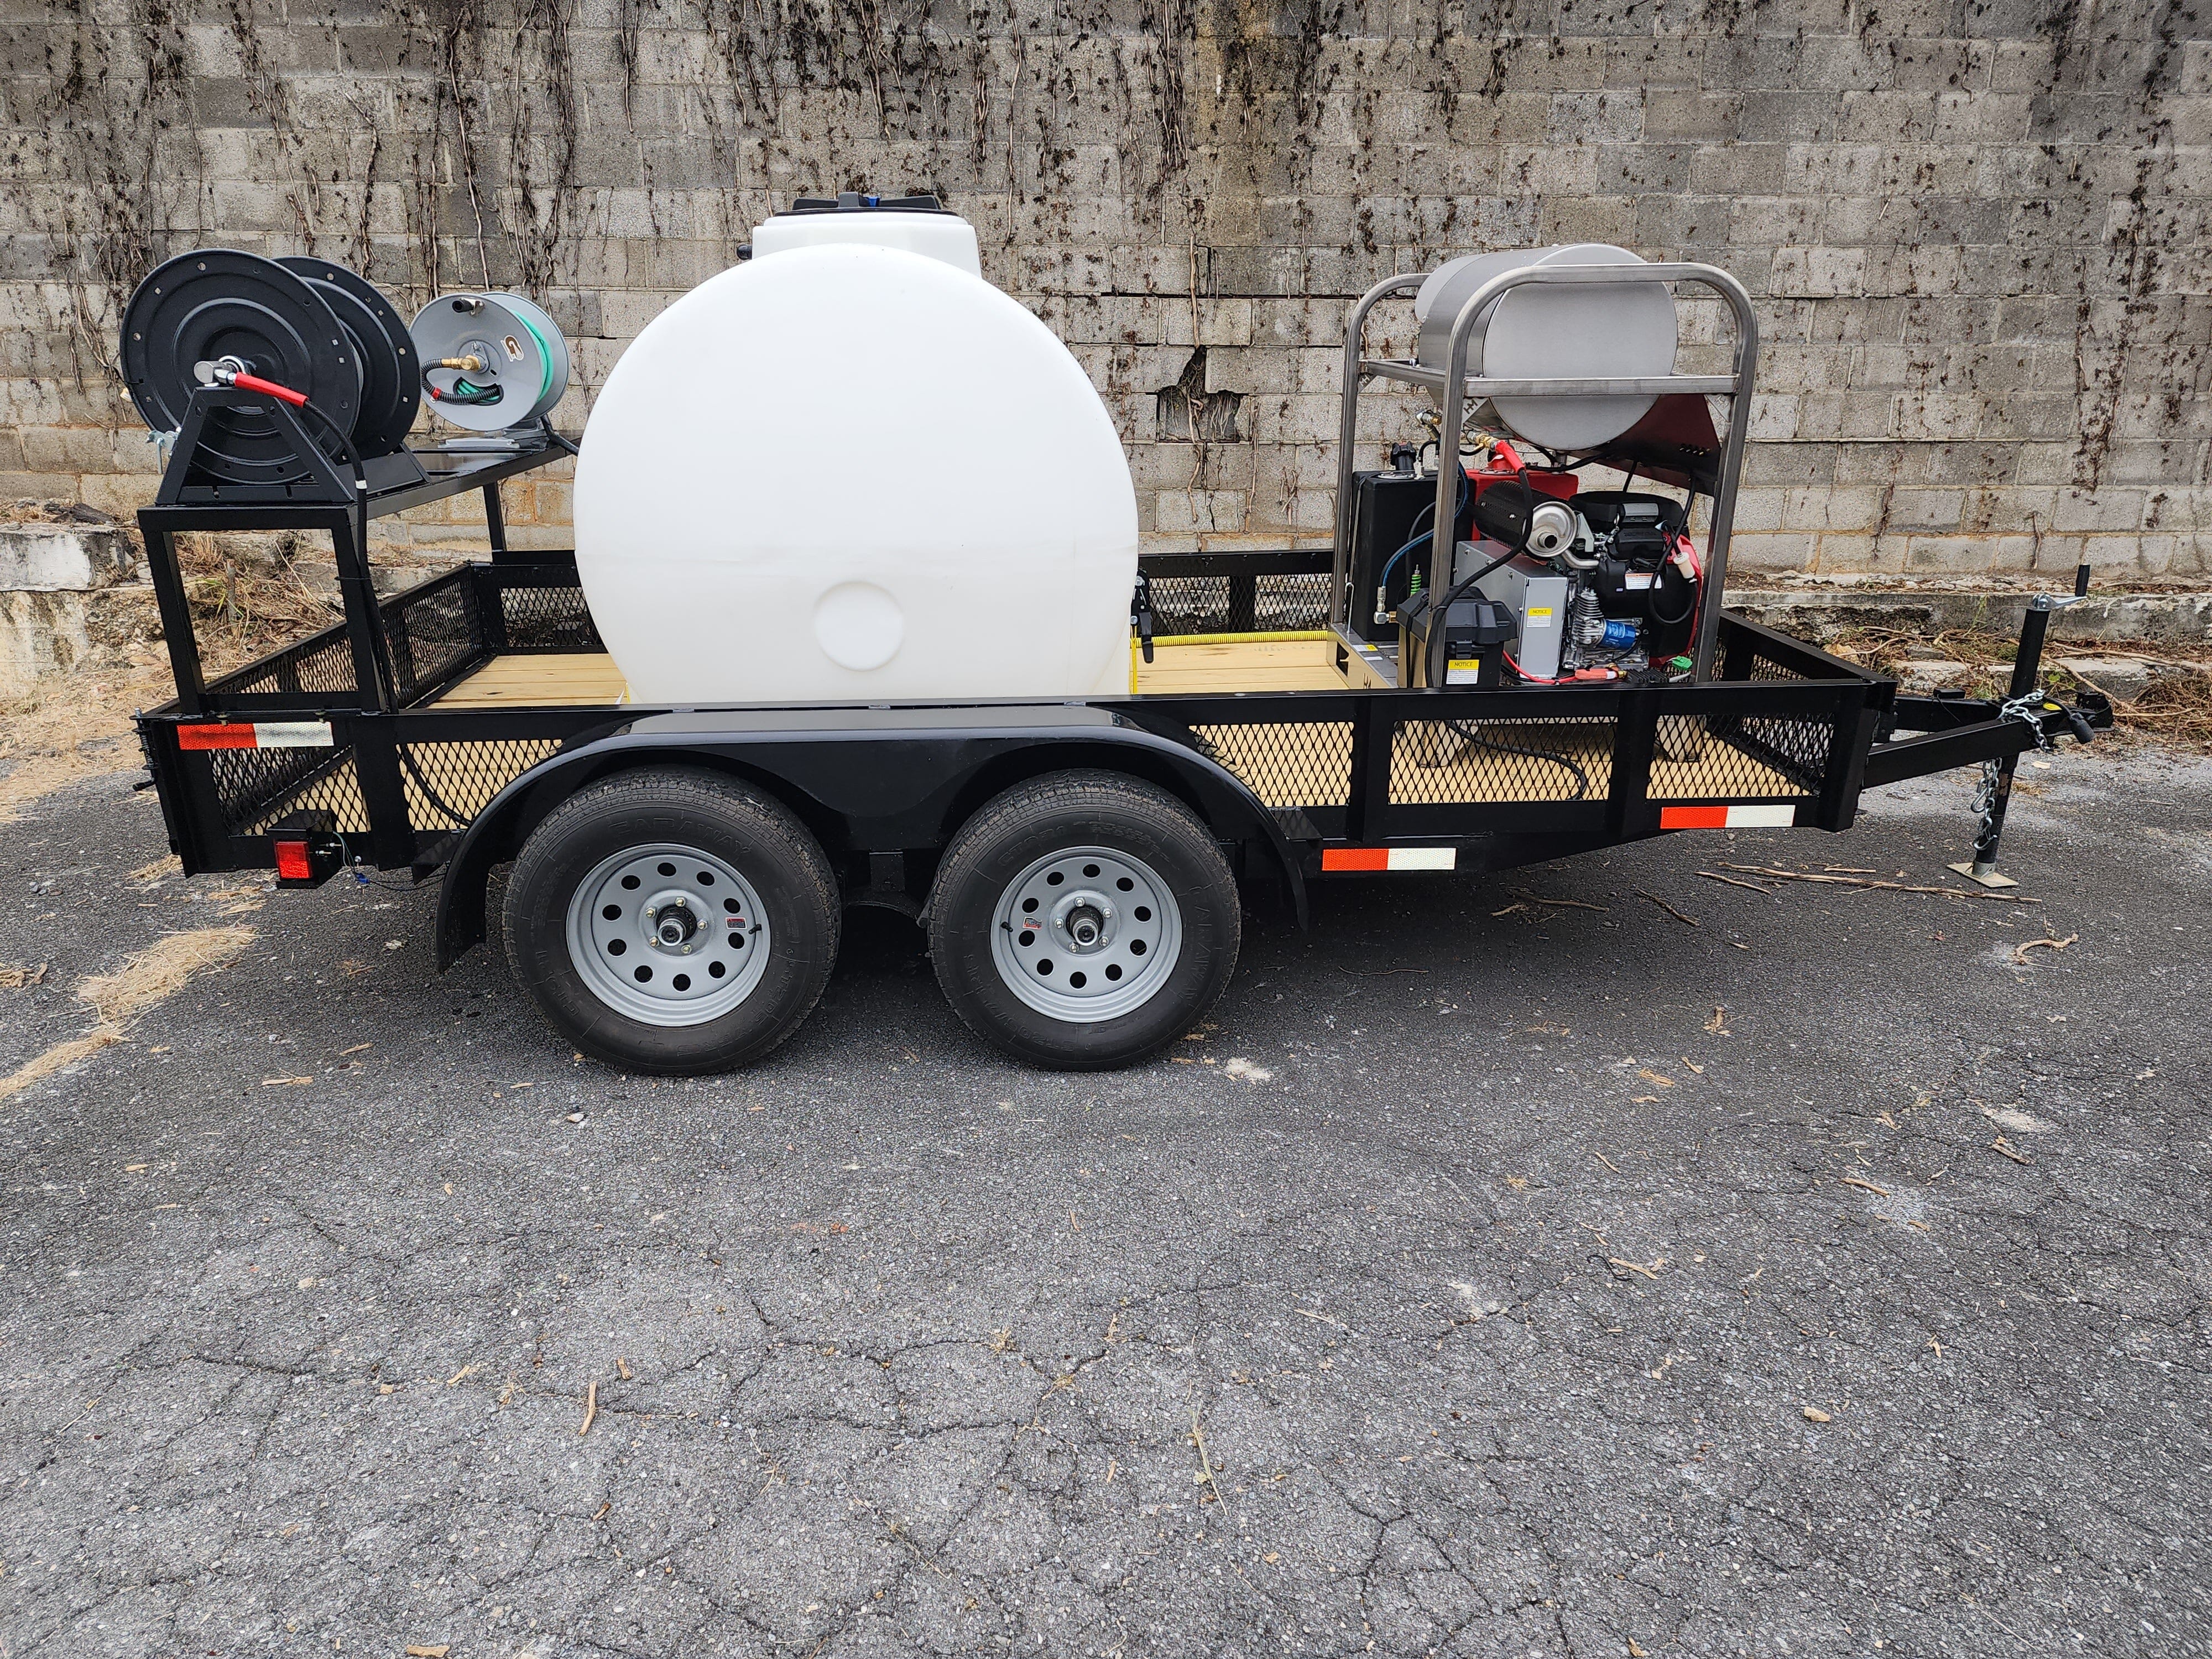 Hydro Max 10gpm at 3000psi Hot Water Trailer Package-SS Unit Pressure Washer Trailer Package BCE Cleaning Systems 